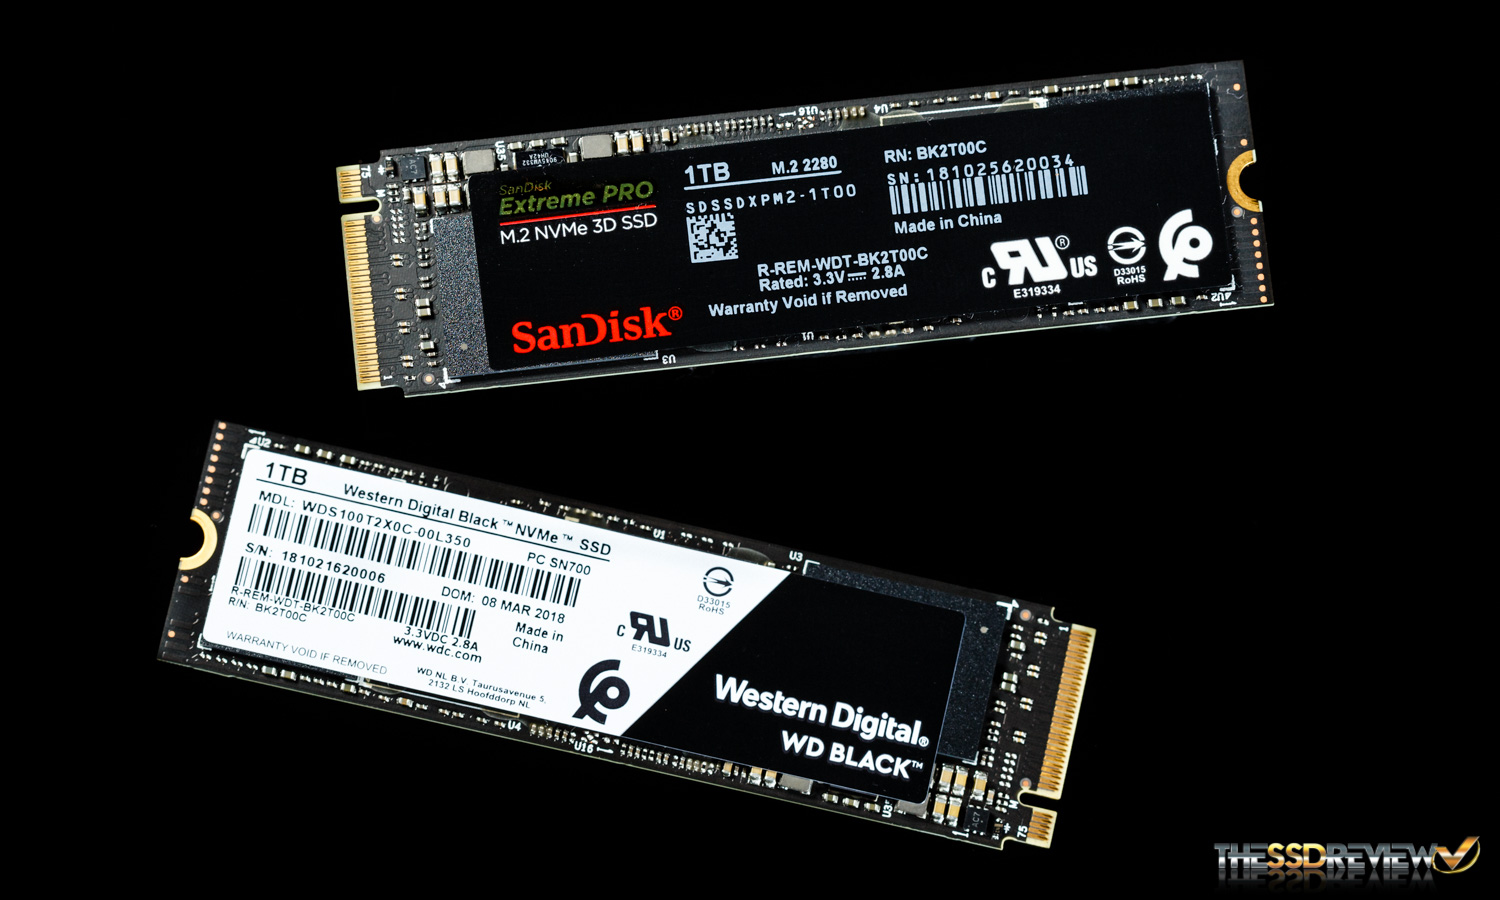 Wd Black Sandisk Extreme Pro M 2 Nvme Ssd Review 1tb True Enthusiast Class Performance From Western Digital The Ssd Review